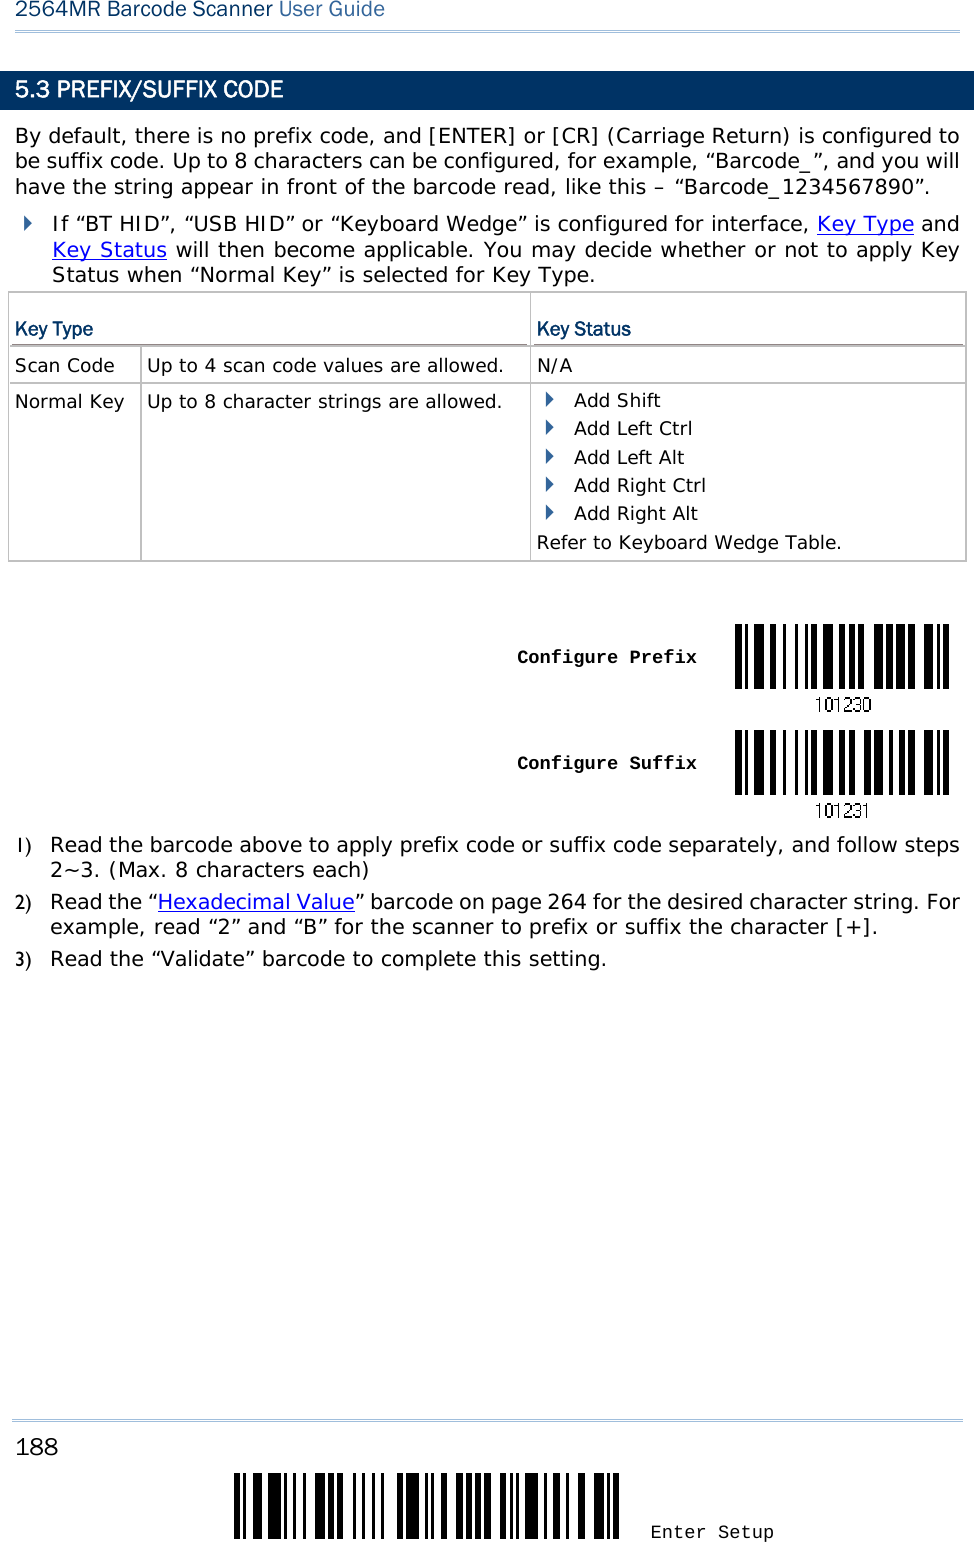 188 Enter Setup 2564MR Barcode Scanner User Guide  5.3 PREFIX/SUFFIX CODE By default, there is no prefix code, and [ENTER] or [CR] (Carriage Return) is configured to be suffix code. Up to 8 characters can be configured, for example, “Barcode_”, and you will have the string appear in front of the barcode read, like this – “Barcode_1234567890”.  If “BT HID”, “USB HID” or “Keyboard Wedge” is configured for interface, Key Type and Key Status will then become applicable. You may decide whether or not to apply Key Status when “Normal Key” is selected for Key Type. Key Type  Key Status Scan Code   Up to 4 scan code values are allowed.  N/A Normal Key   Up to 8 character strings are allowed.   Add Shift  Add Left Ctrl  Add Left Alt  Add Right Ctrl  Add Right Alt Refer to Keyboard Wedge Table.    Configure Prefix Configure Suffix1) Read the barcode above to apply prefix code or suffix code separately, and follow steps 2~3. (Max. 8 characters each) 2) Read the “Hexadecimal Value” barcode on page 264 for the desired character string. For example, read “2” and “B” for the scanner to prefix or suffix the character [+]. 3) Read the “Validate” barcode to complete this setting. 